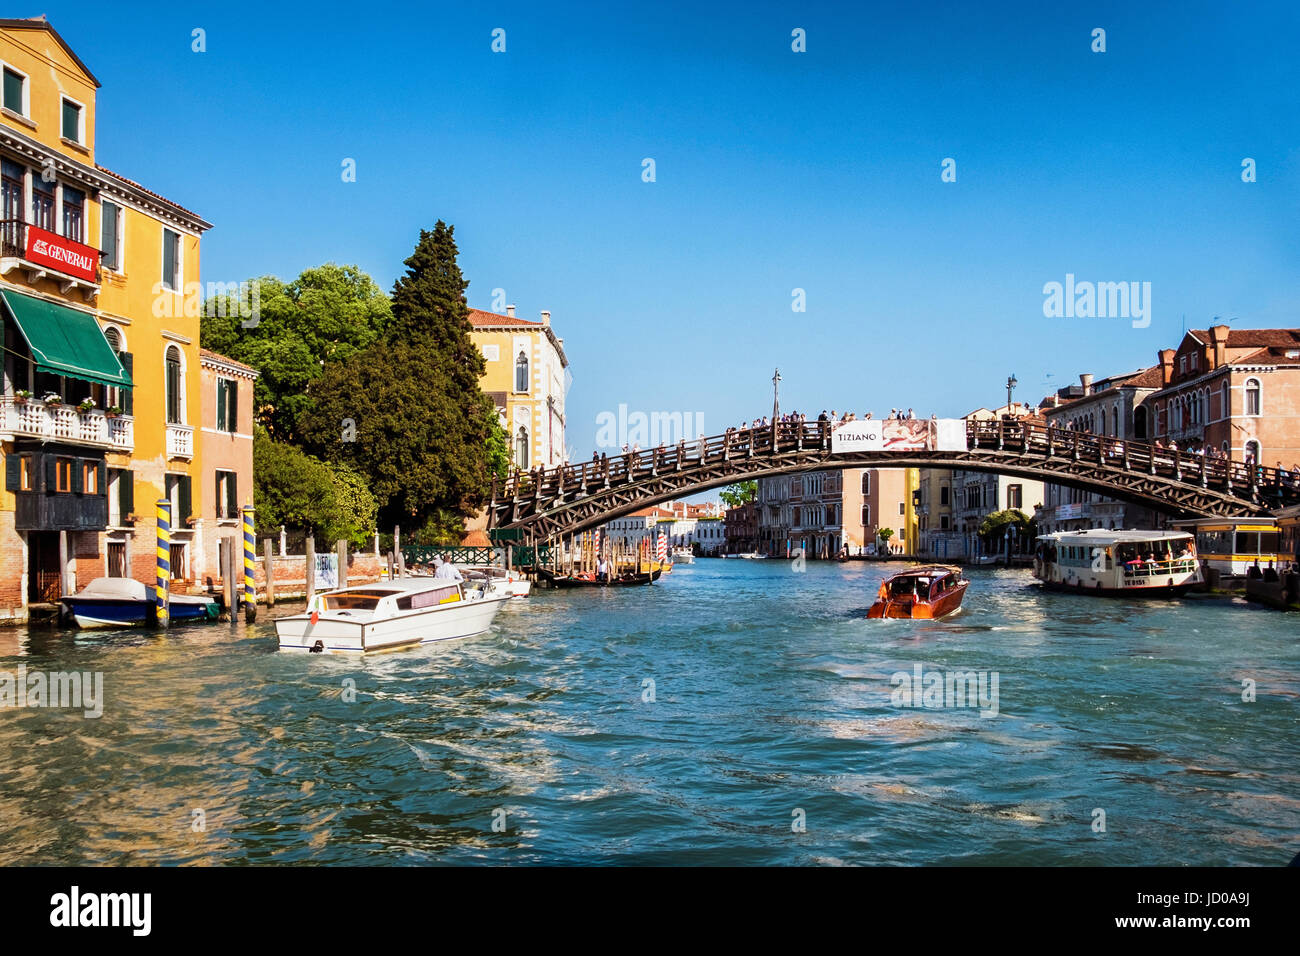 Italy, Venice, San Marco. Grand canal view,Ponte dell'Accademia,People crossing the Accademia Bridge, houses,water bus and water taxis Stock Photo